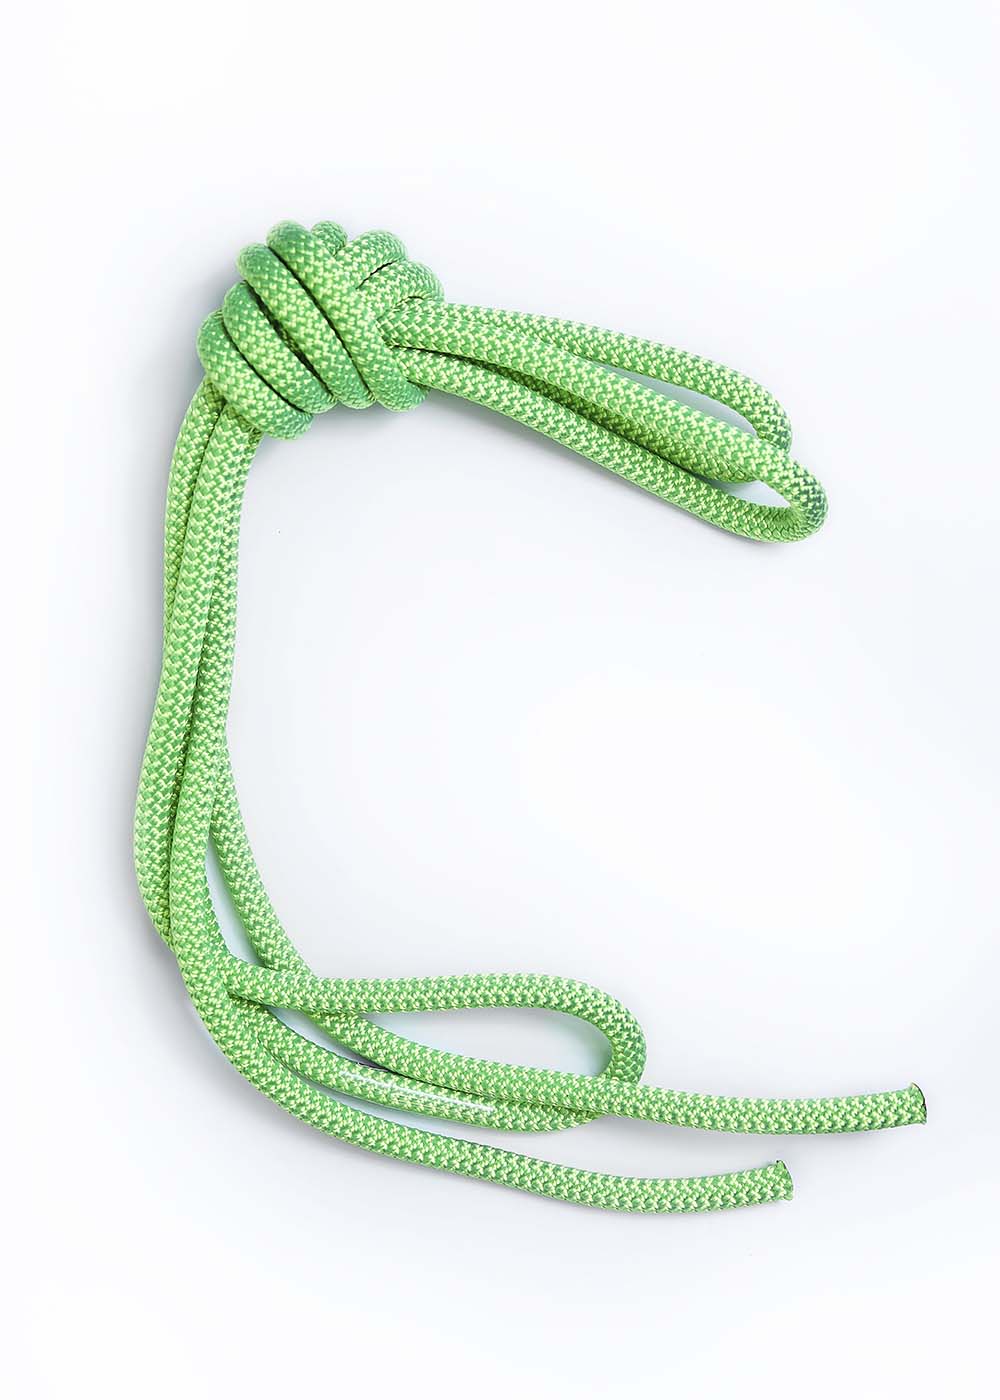 Buy Rope for gymnastics PASTORELLI NEW ORLEANS, 3m (nylon, Fluo Green  (00101), 3m) at the Grand Prix store